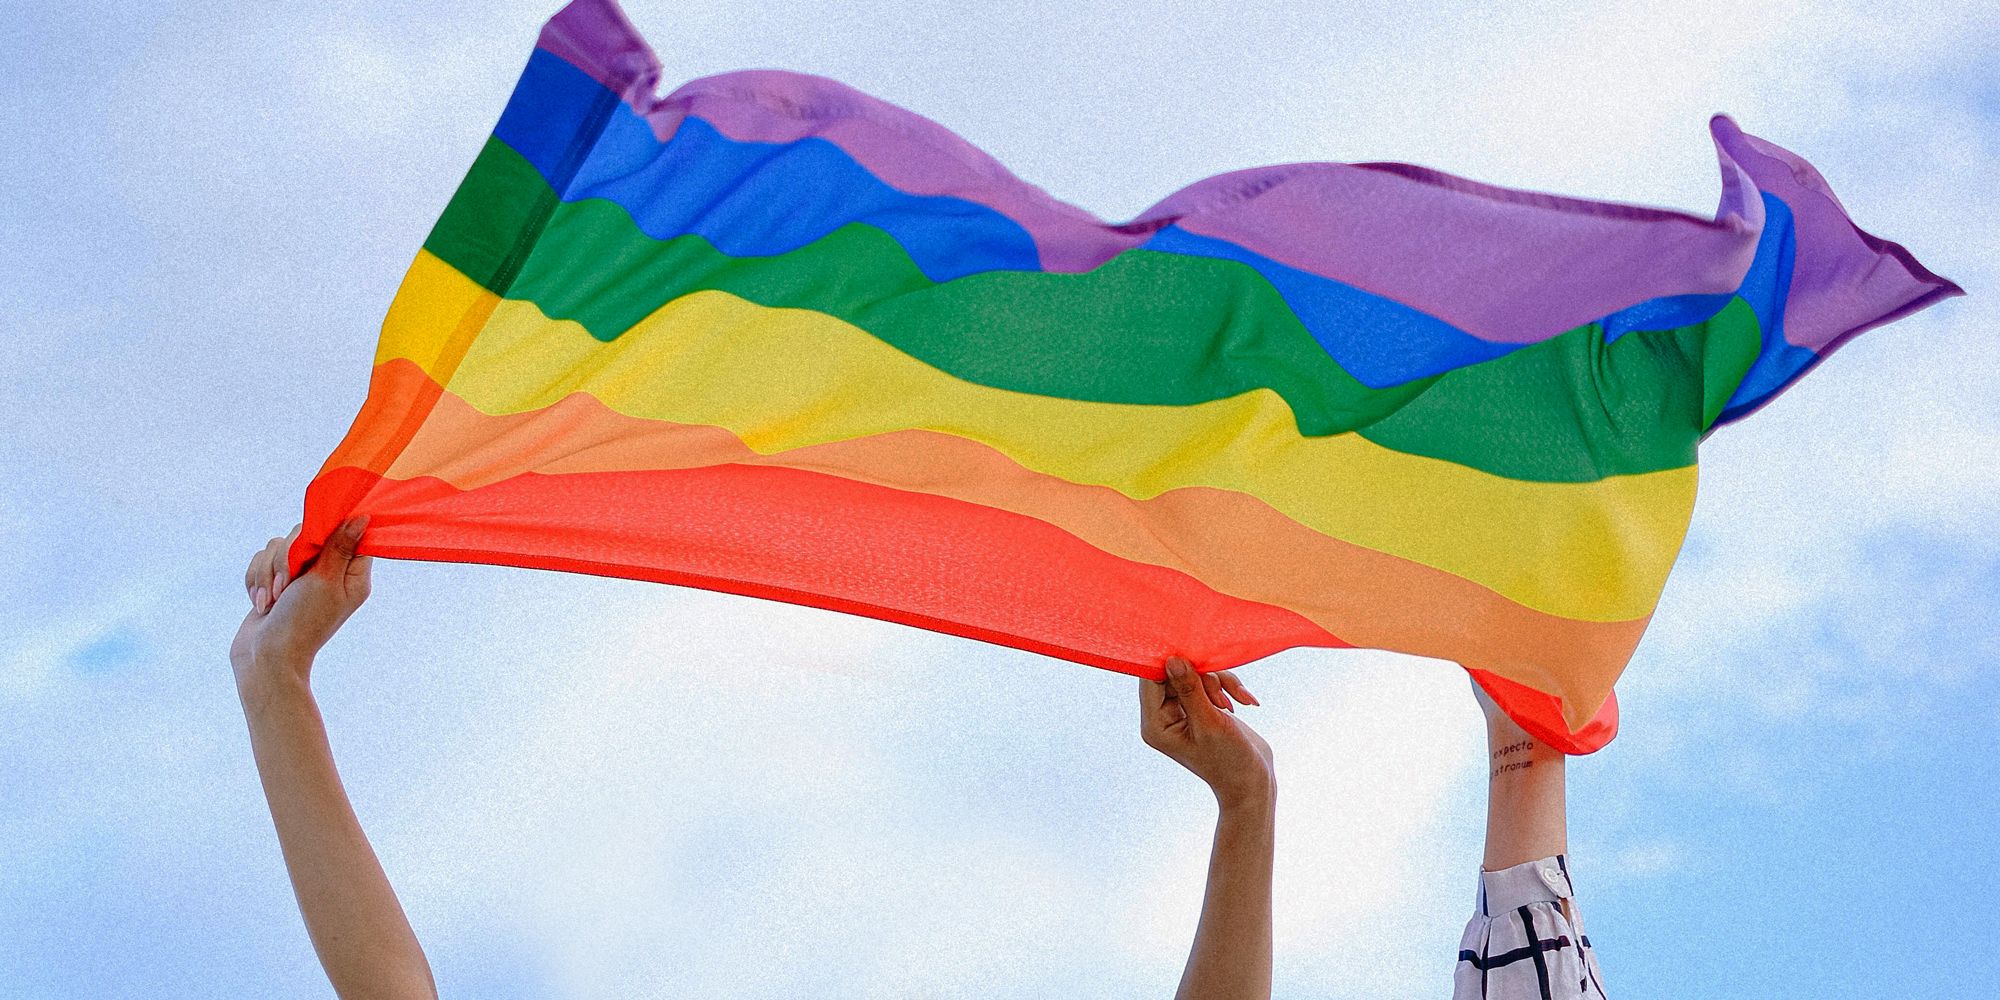 Why the rainbow flag is now one of many during Pride month